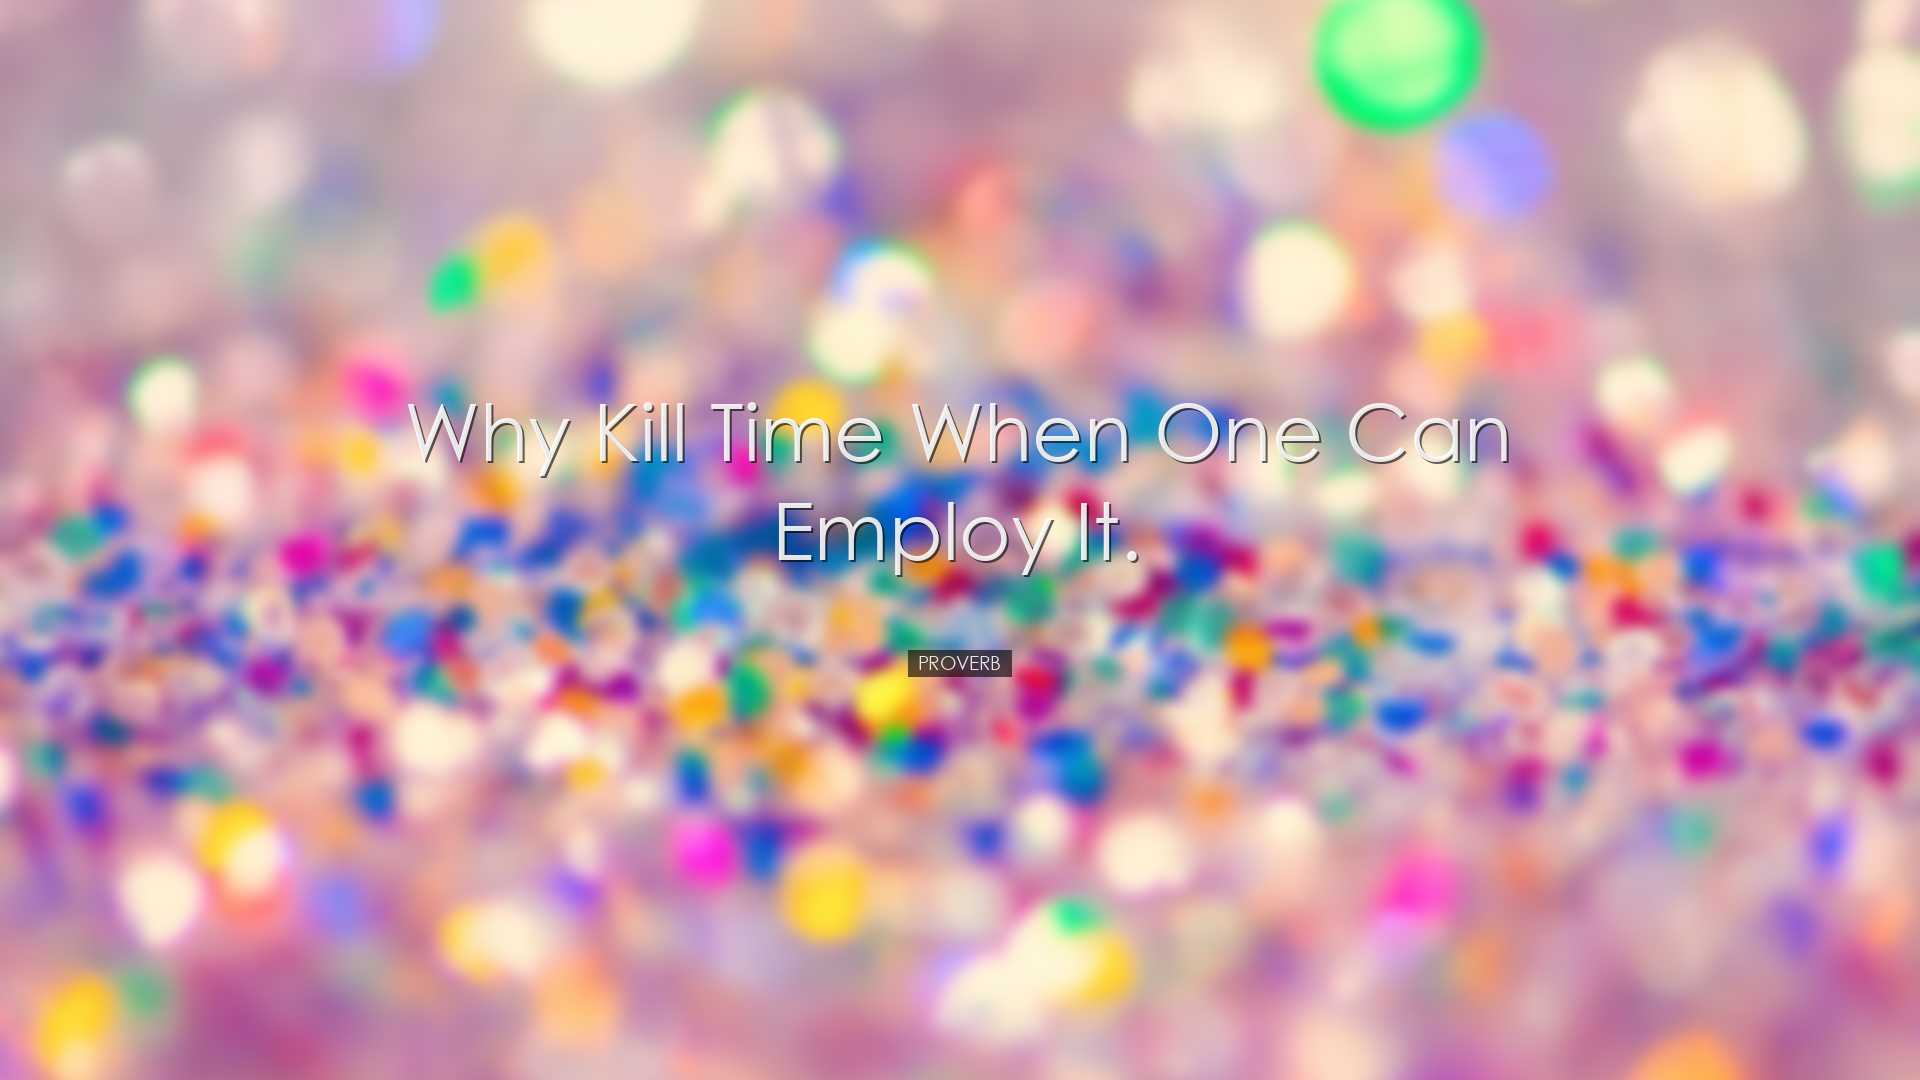 Why kill time when one can employ it. - Proverb